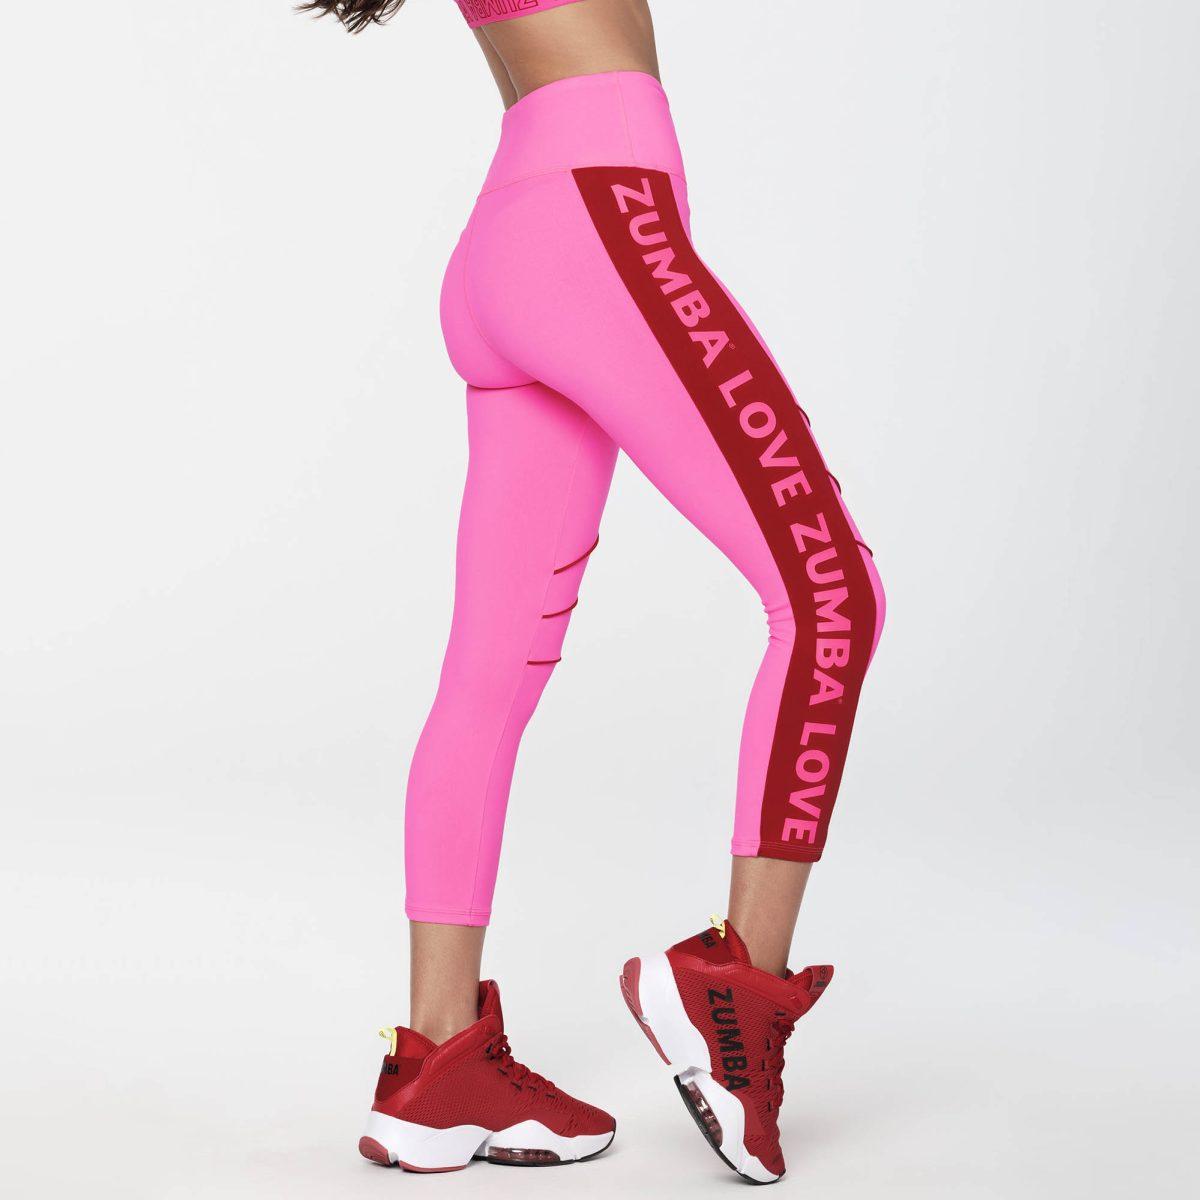 Feel the Energy with Zumba Love Perfect Crop Leggings